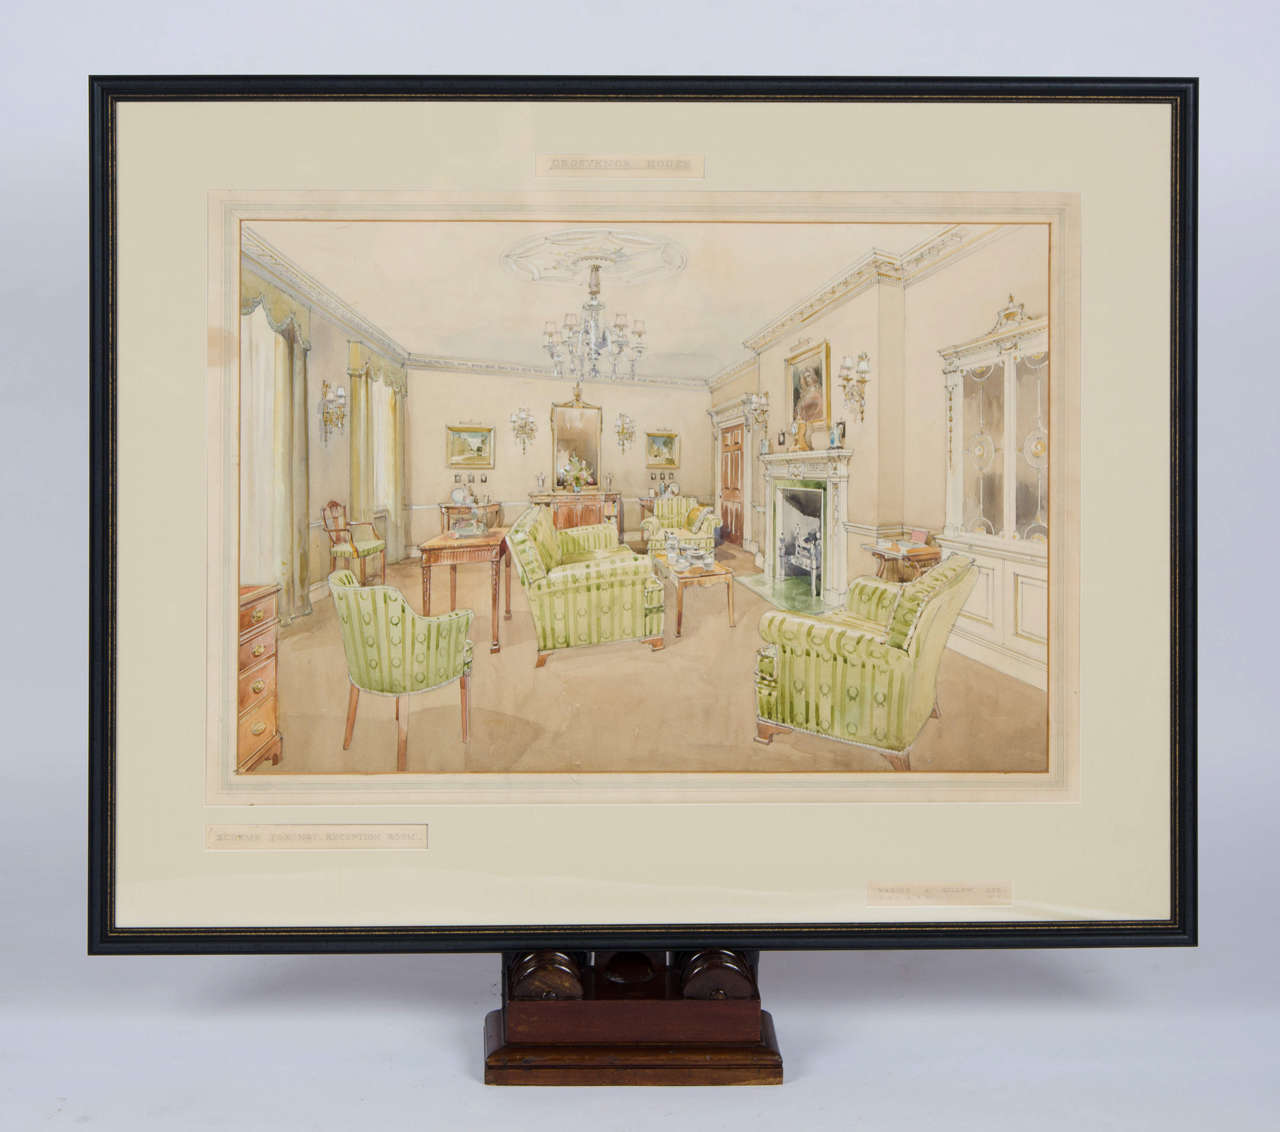 An original watercolor design scheme by Waring & Gillow for an interior entitled 